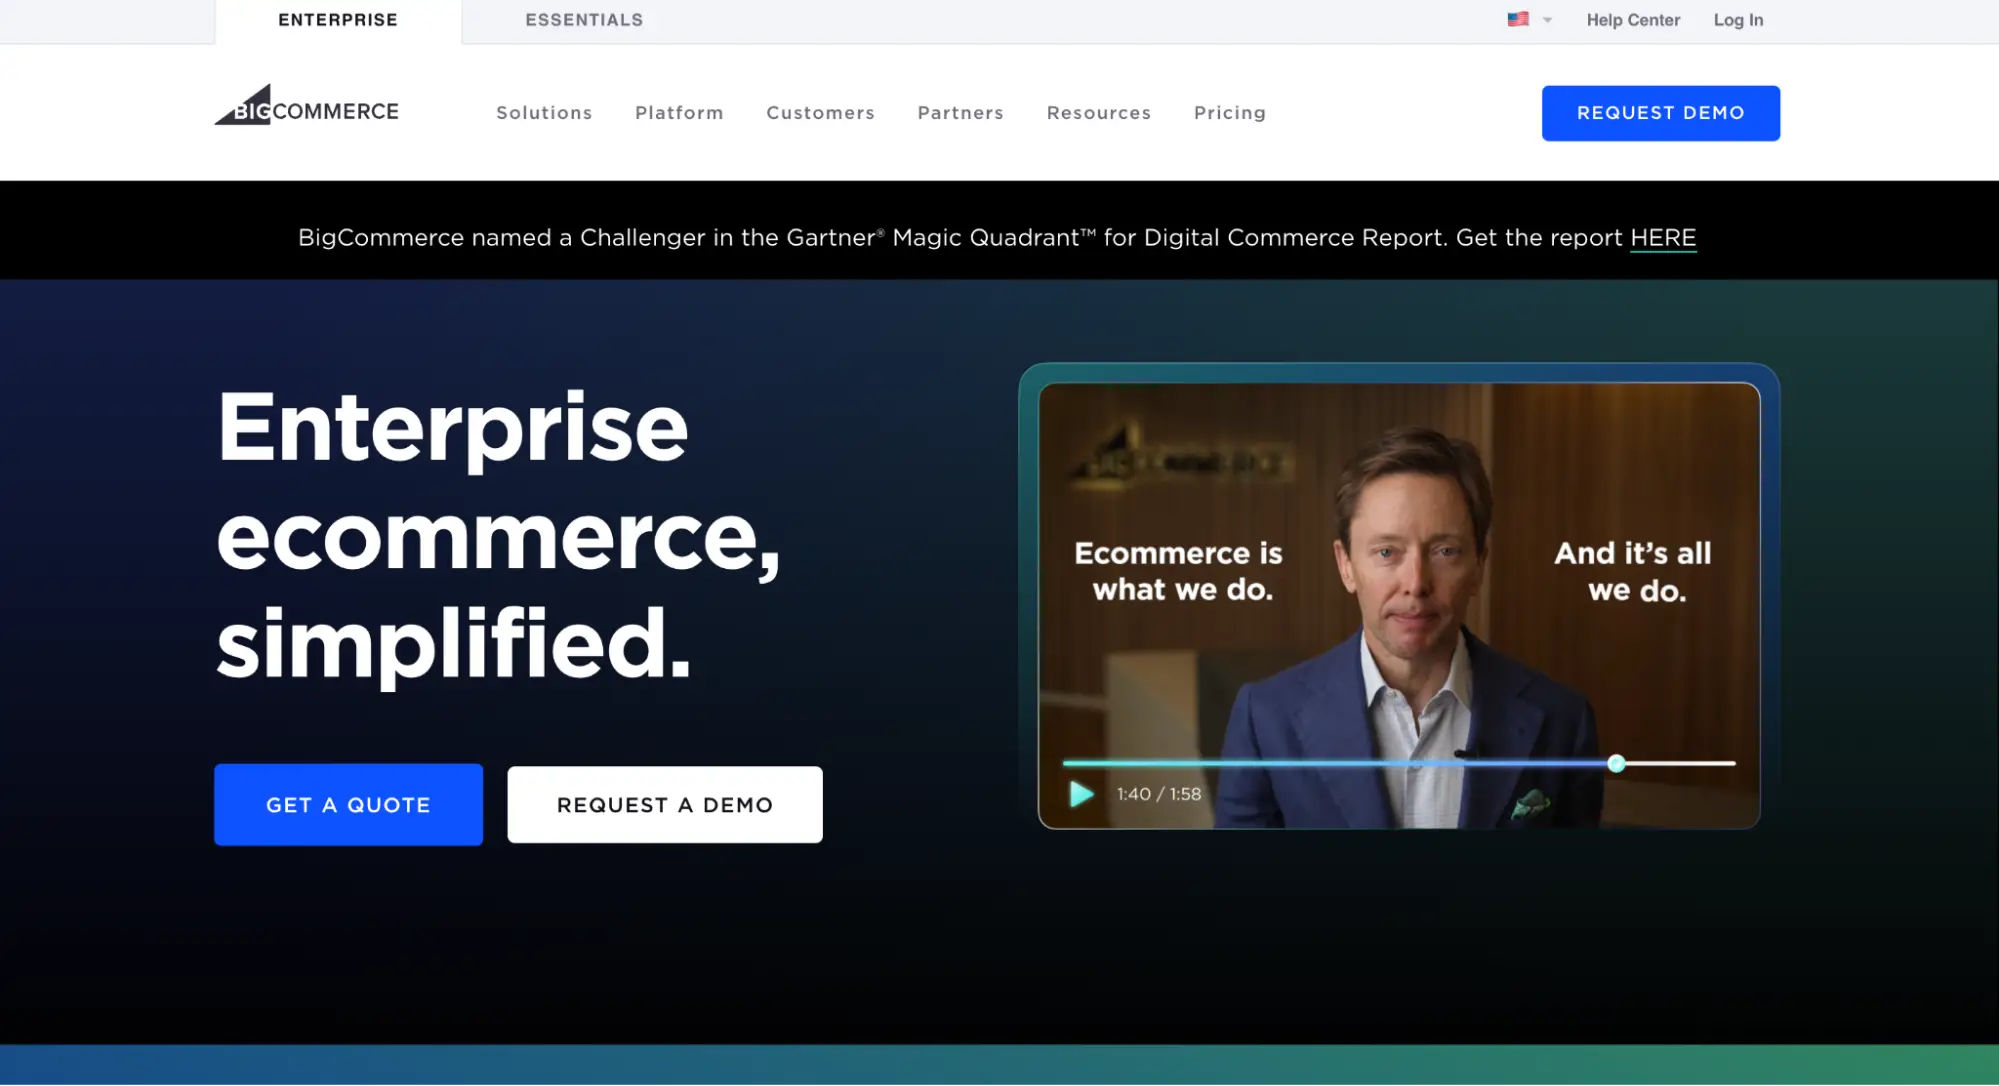 BigCommerce is best suited for enterprise-size eCommerce businesses